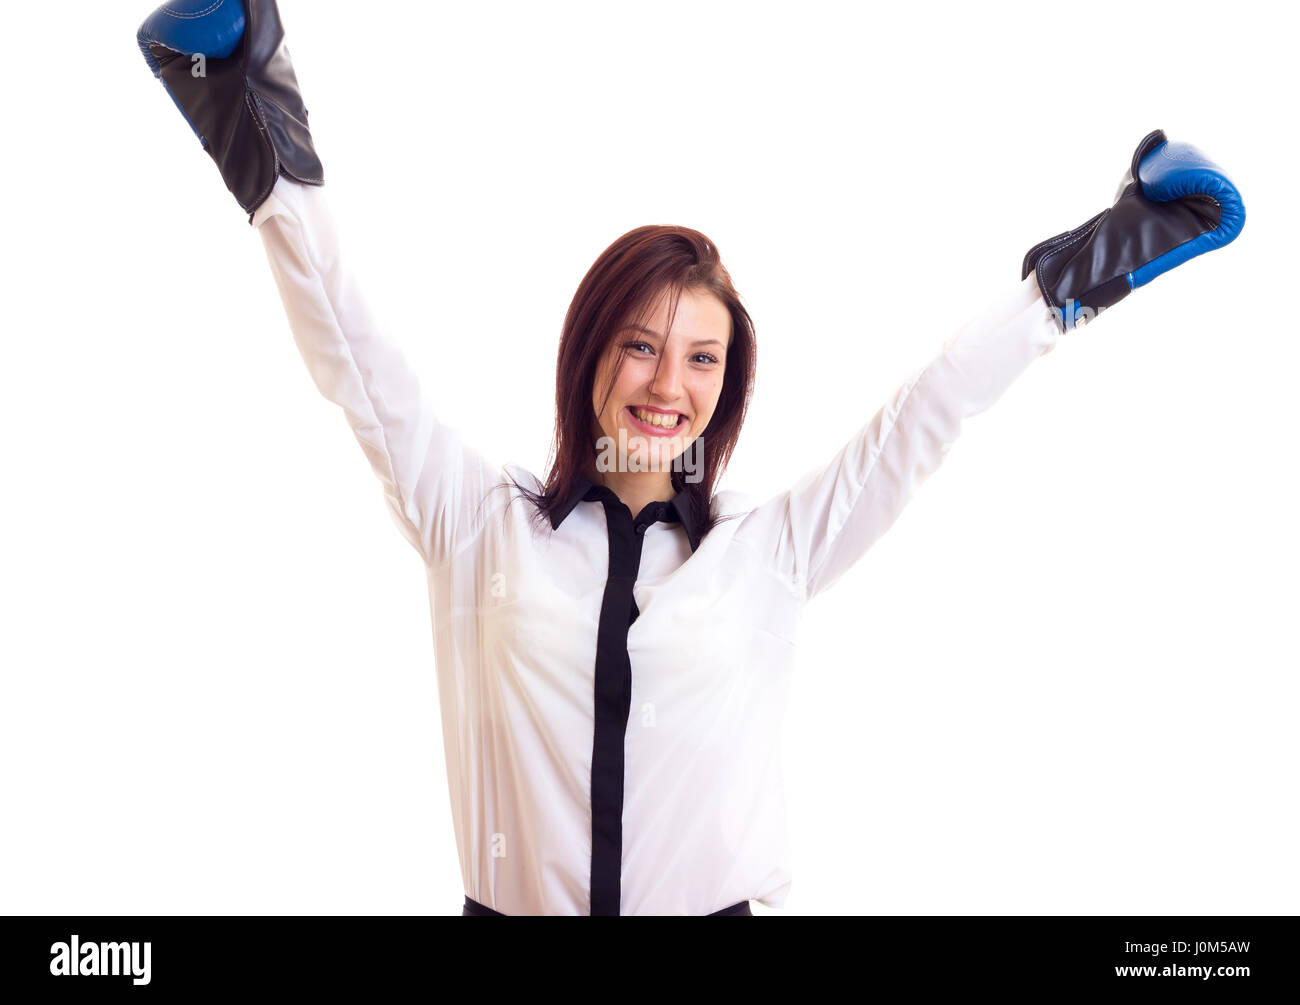 Smiling young woman in white shirt with dark hair and blue boxing gloves on white background in studio Stock Photo